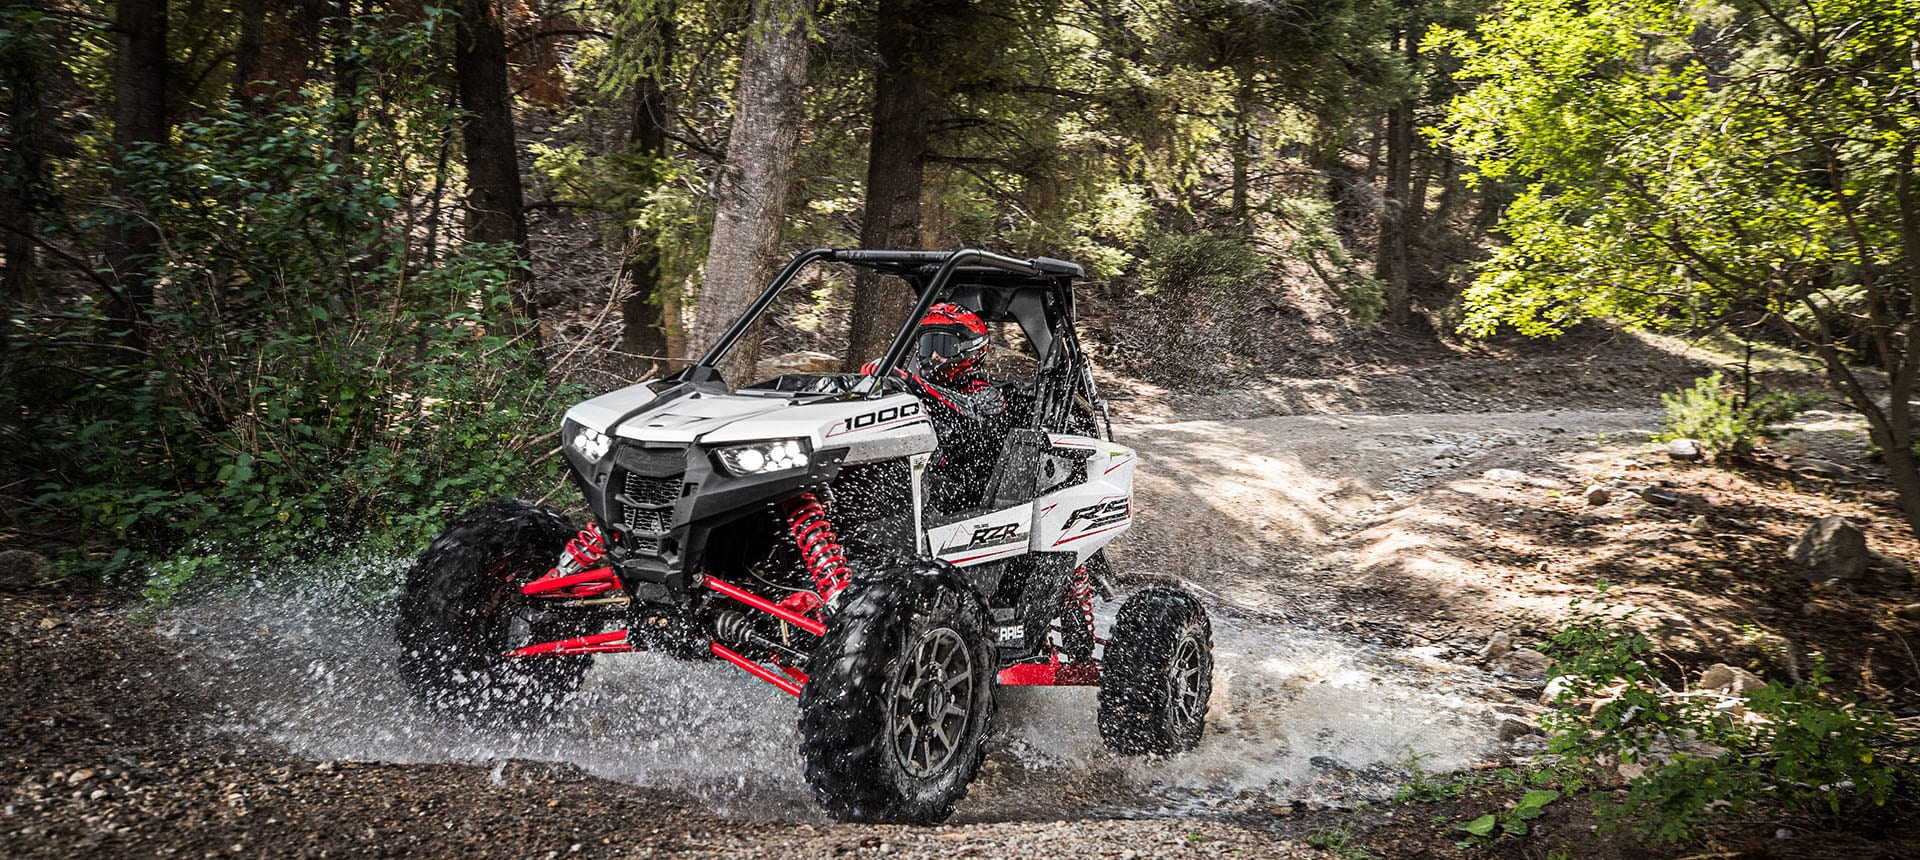 RZR RS1 EXTREME OFFROAD VEHICLE